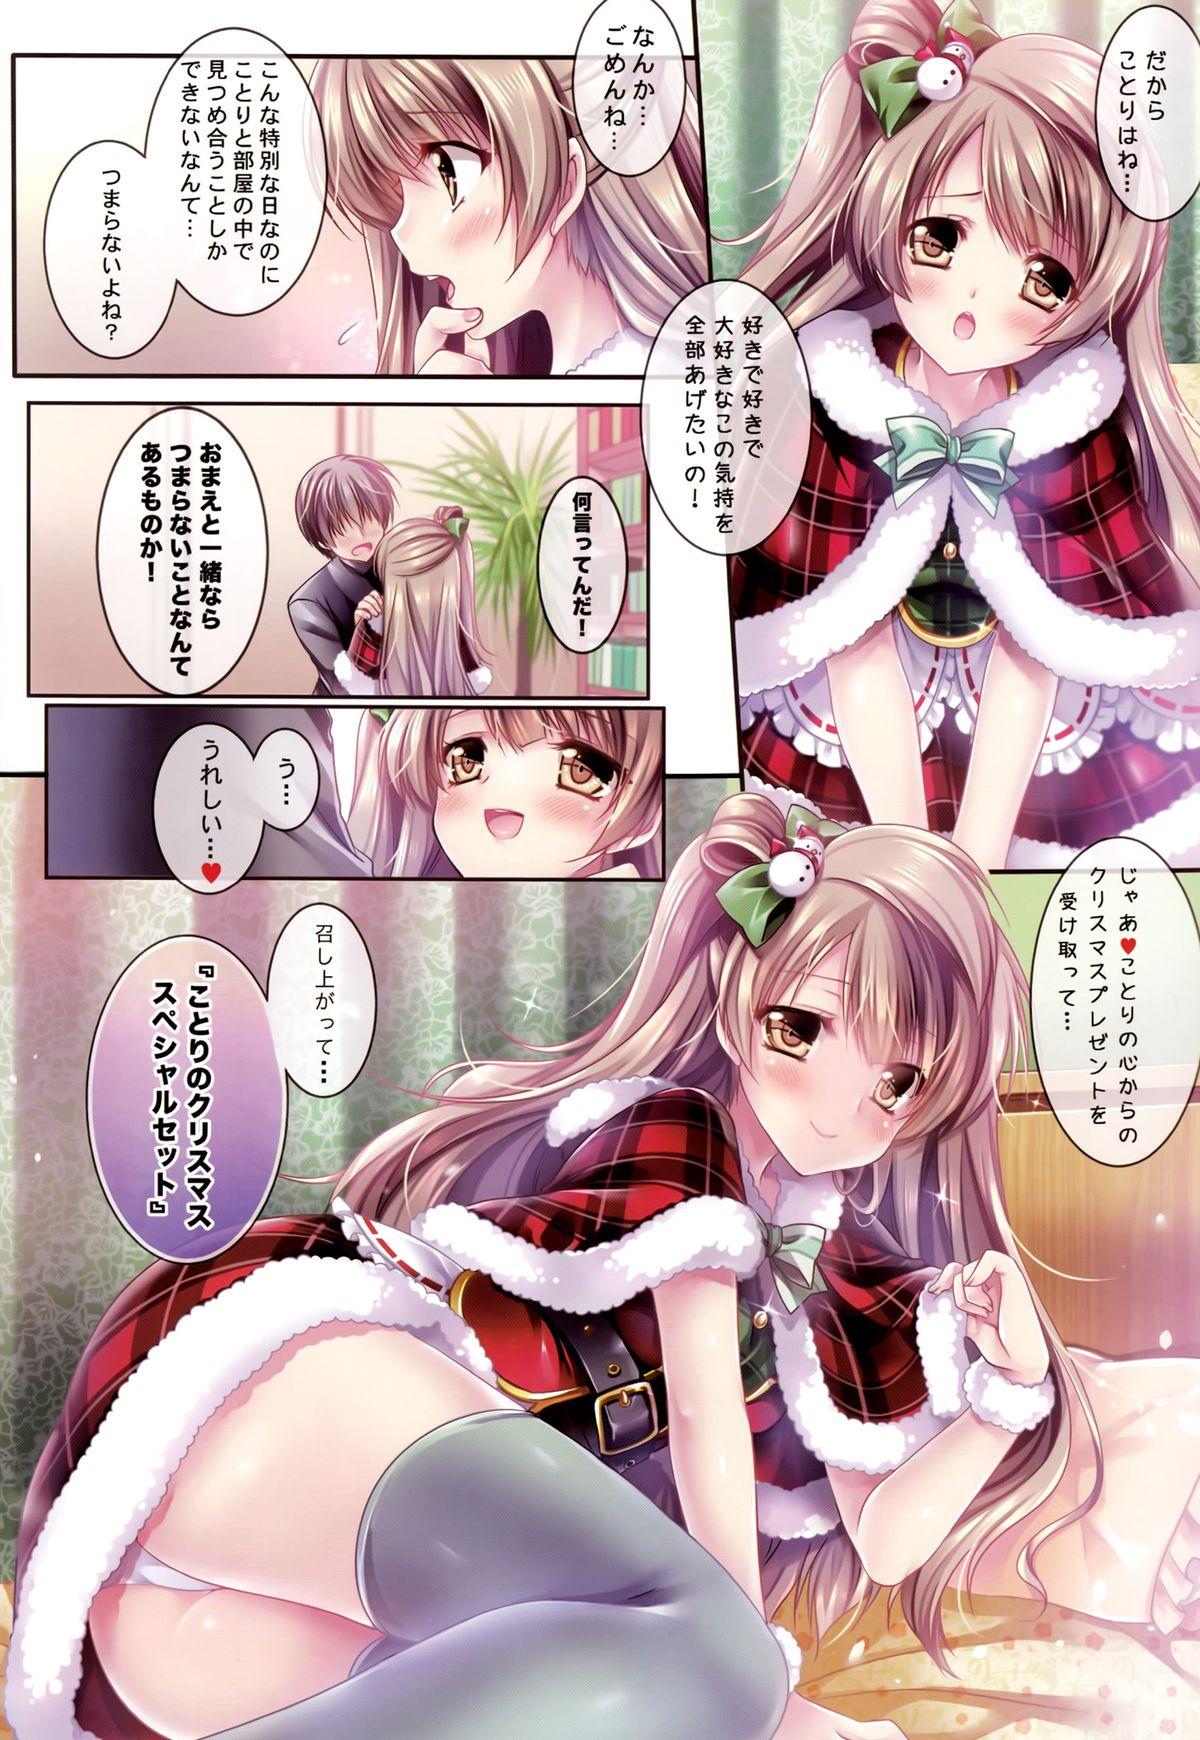 Foreskin Kotori no SPECIAL LOVE SET - Love live 8teen - Page 7